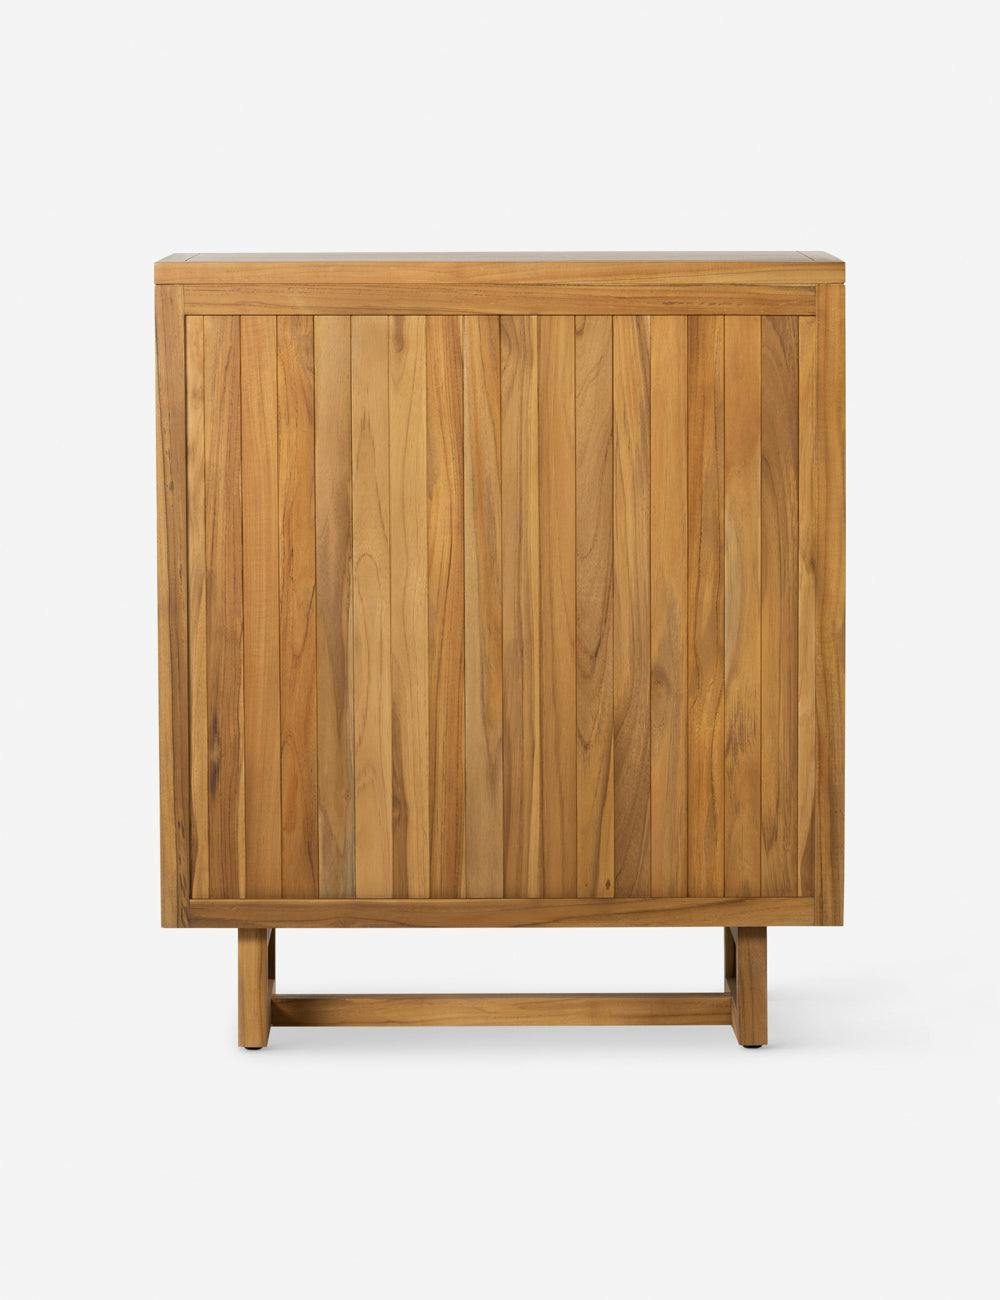 Anson 36" Natural Teak Wood Outdoor Cabinet